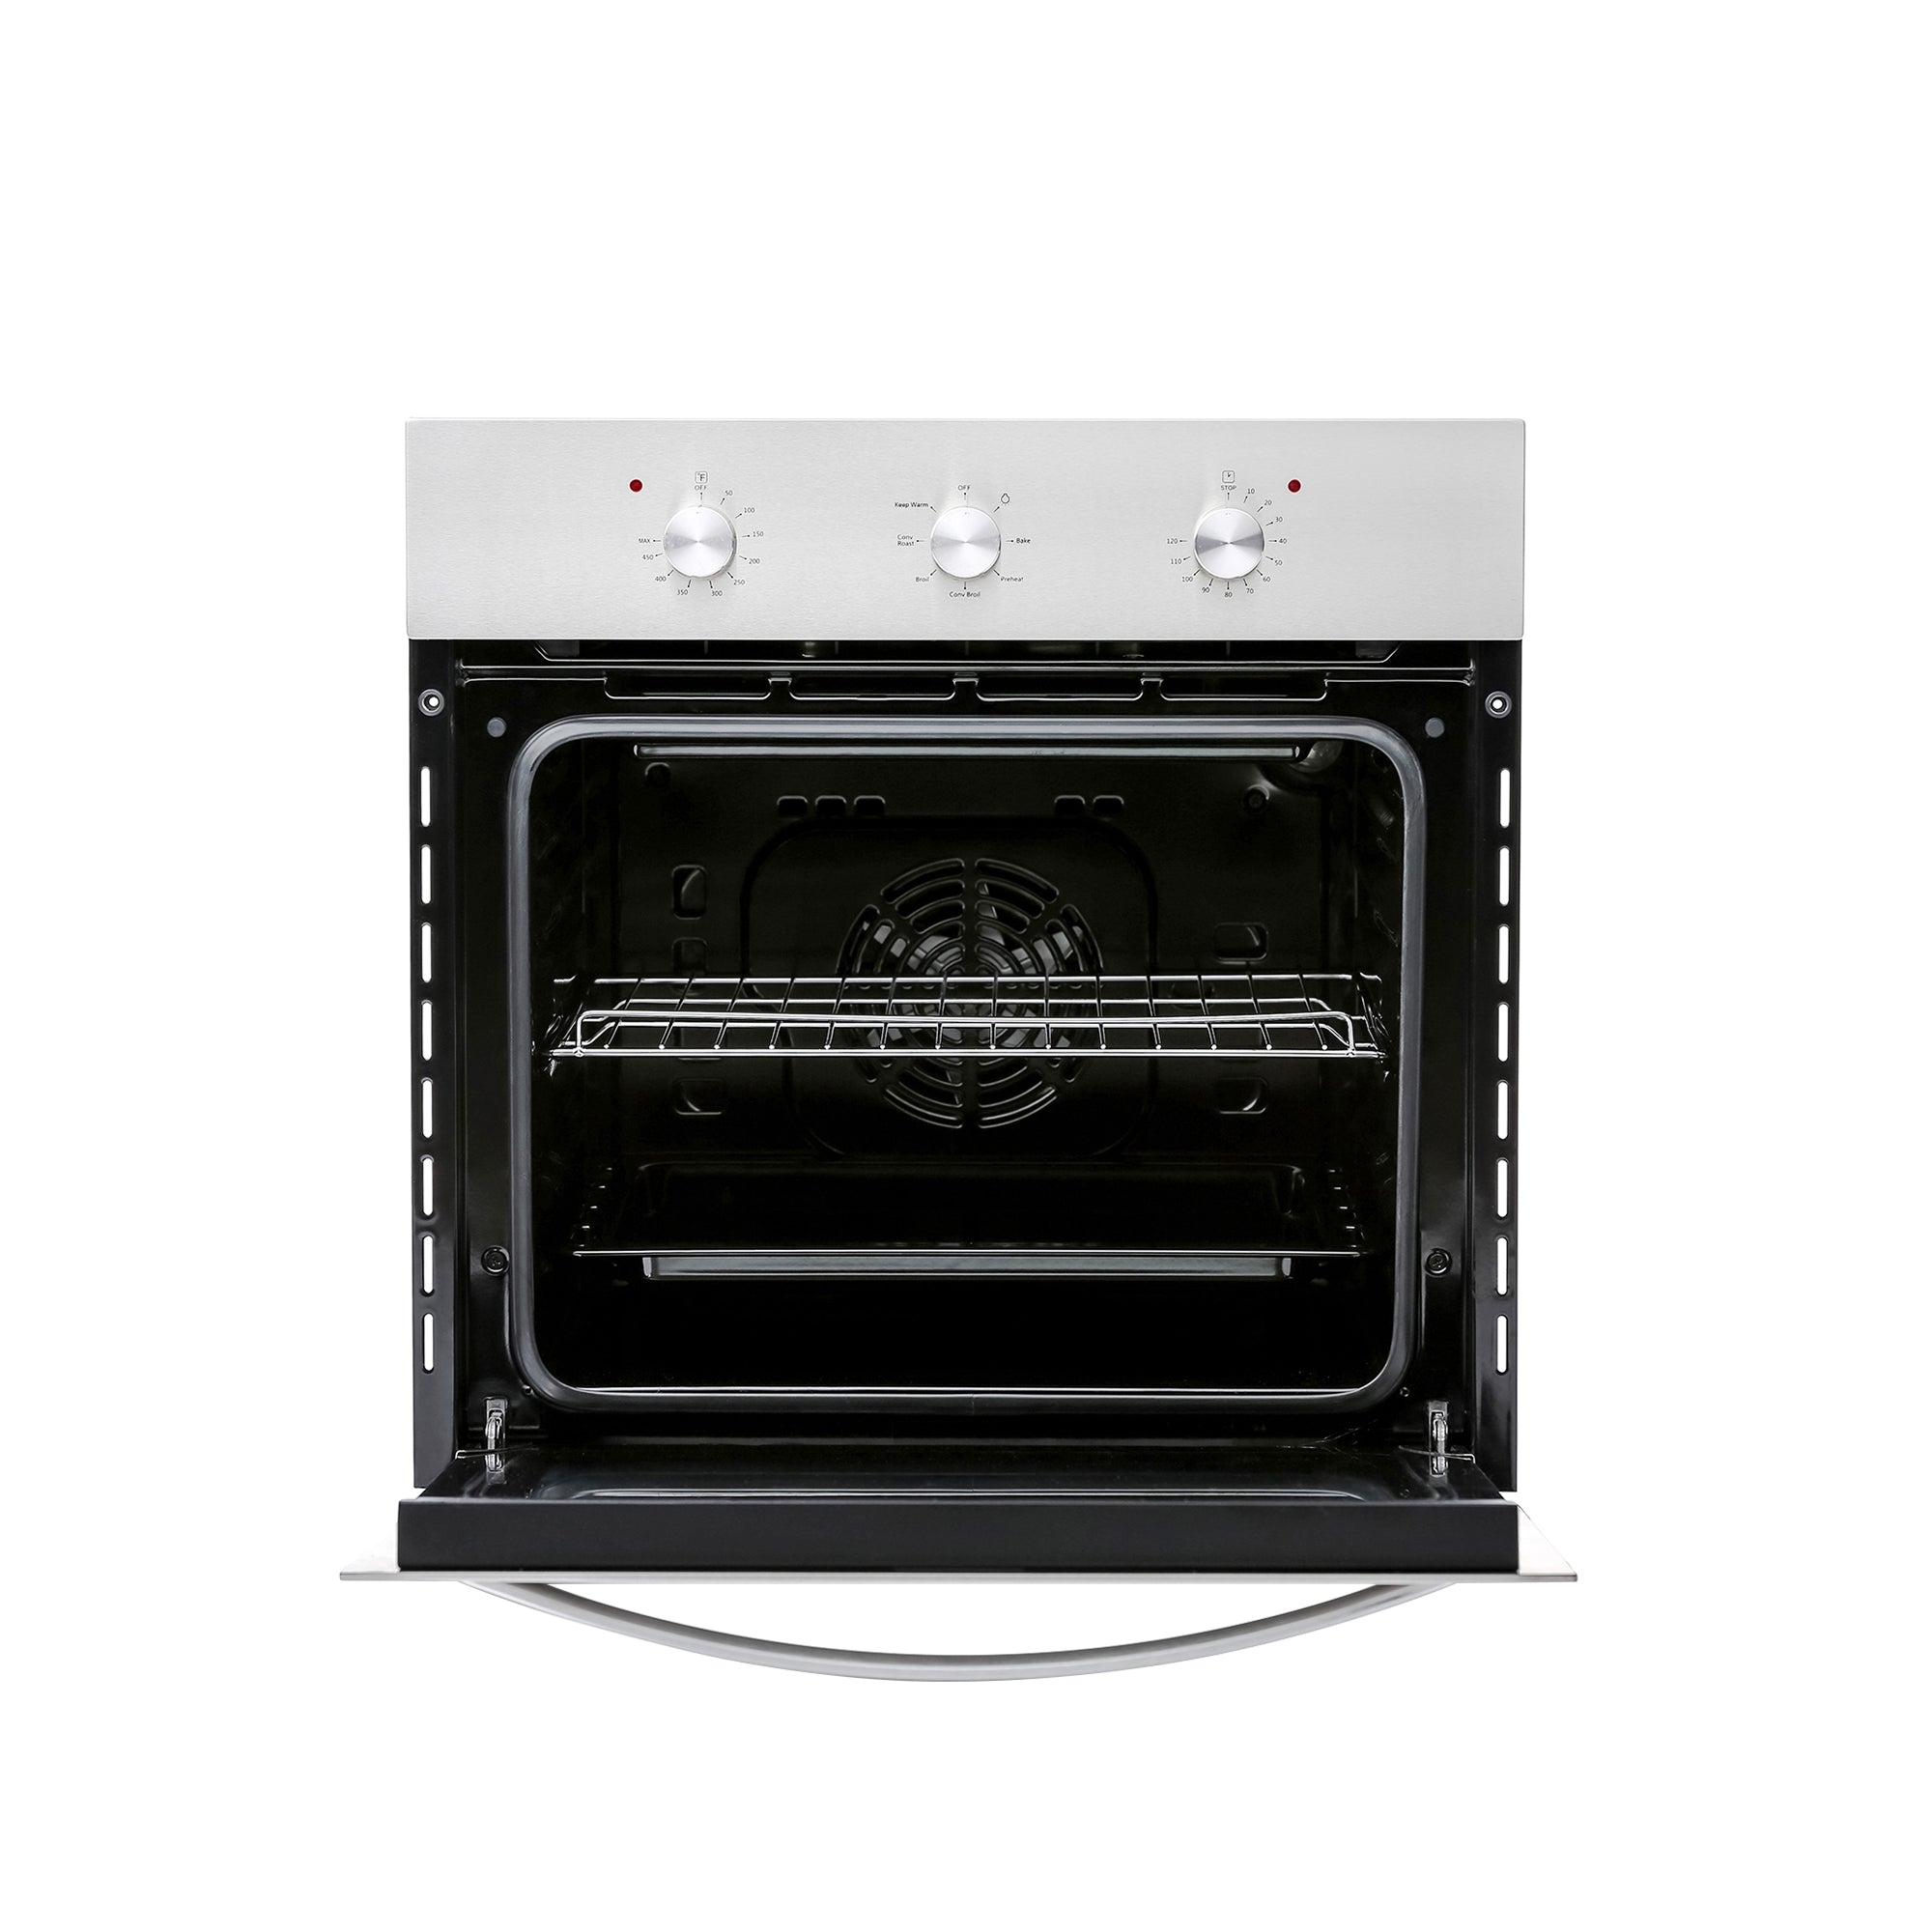 Empava 24WOB14 24 in. Electric Single Wall Oven